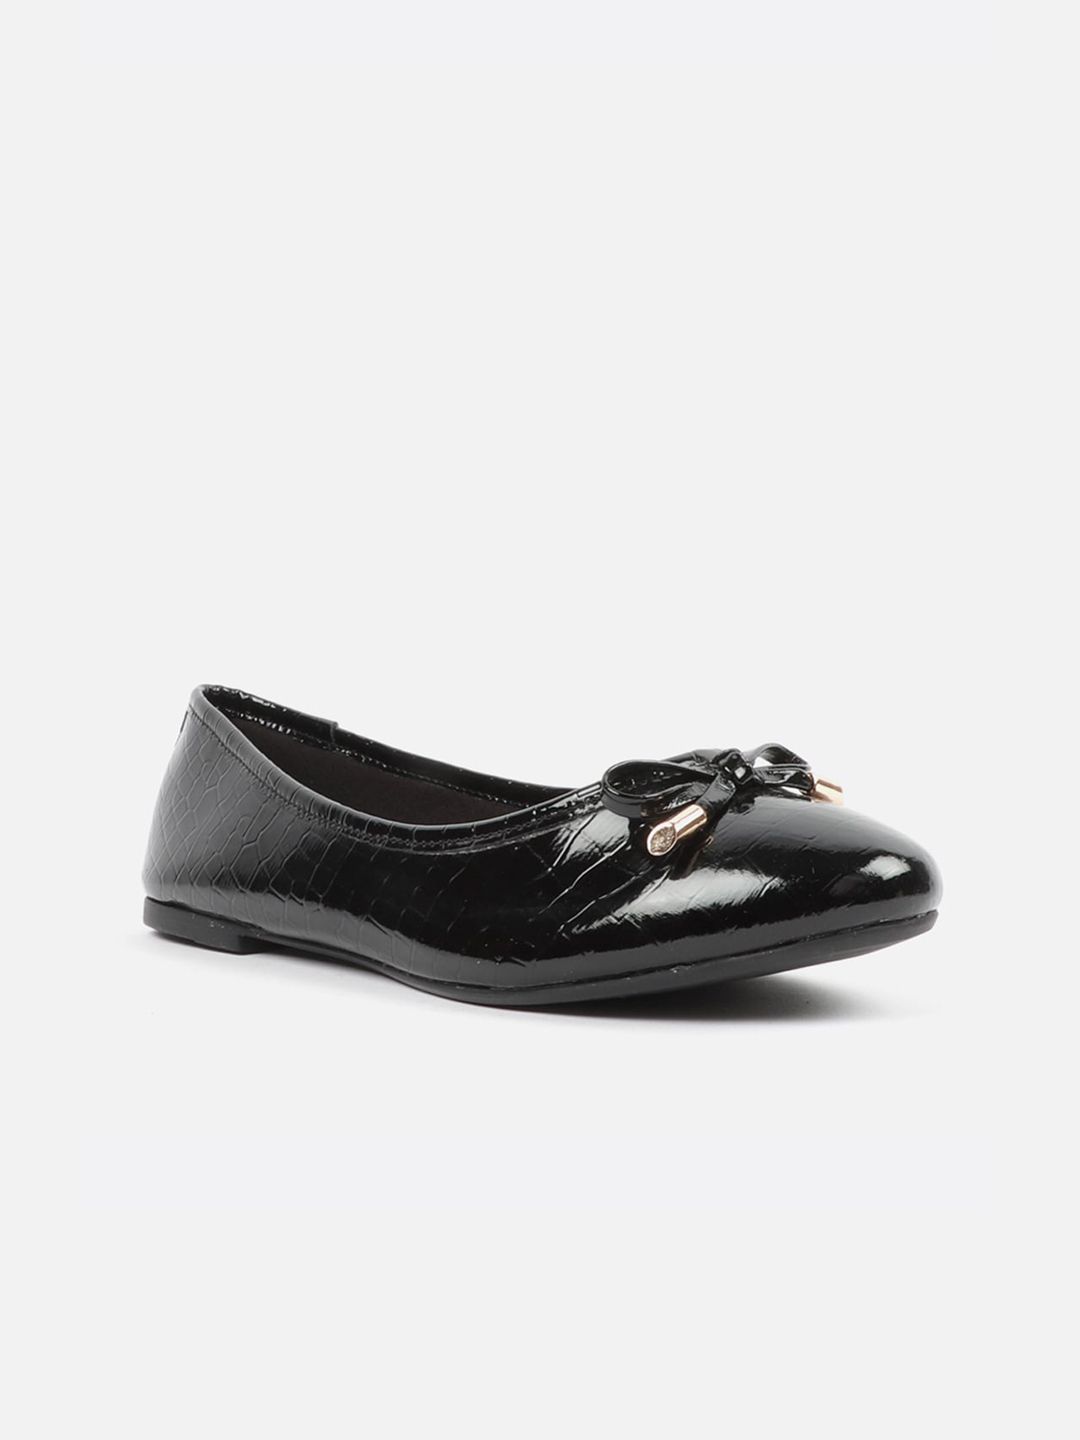 Carlton London Women Black Textured Ballerinas Flats with Bows Price in India